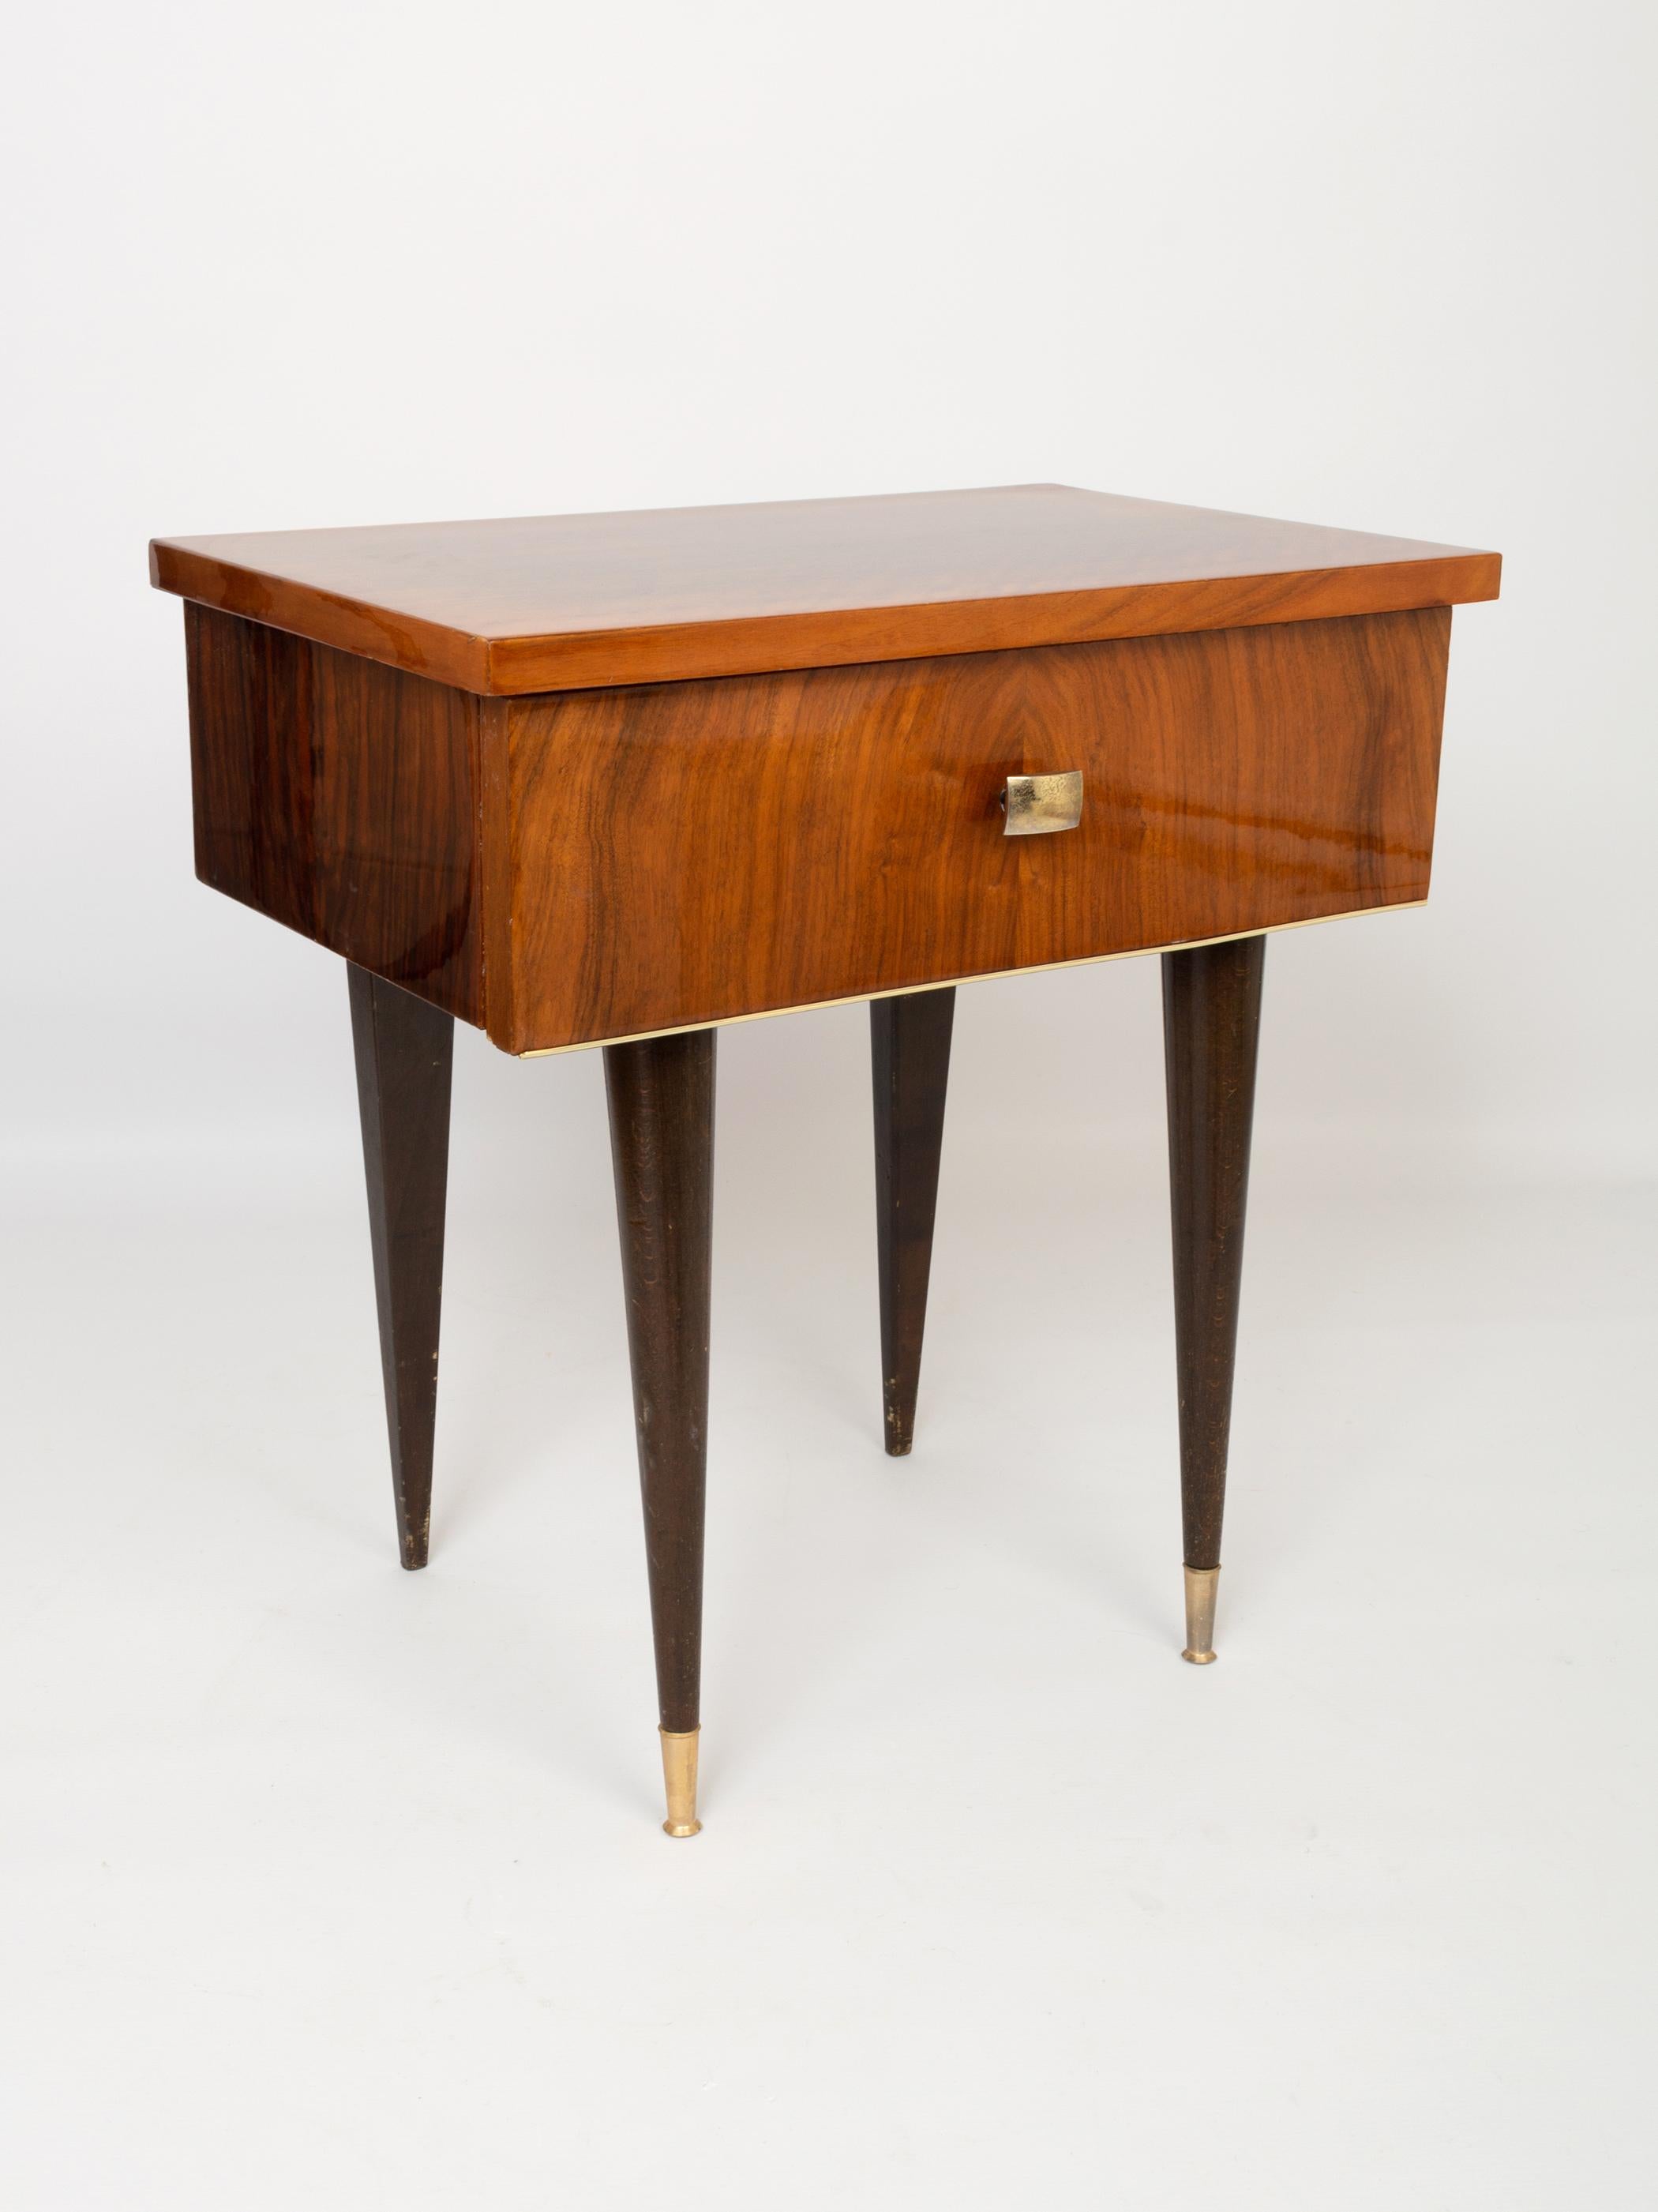 An Art Deco figured walnut veneered night stand/cabinet, France, C.1940.

In excellent vintage condition.